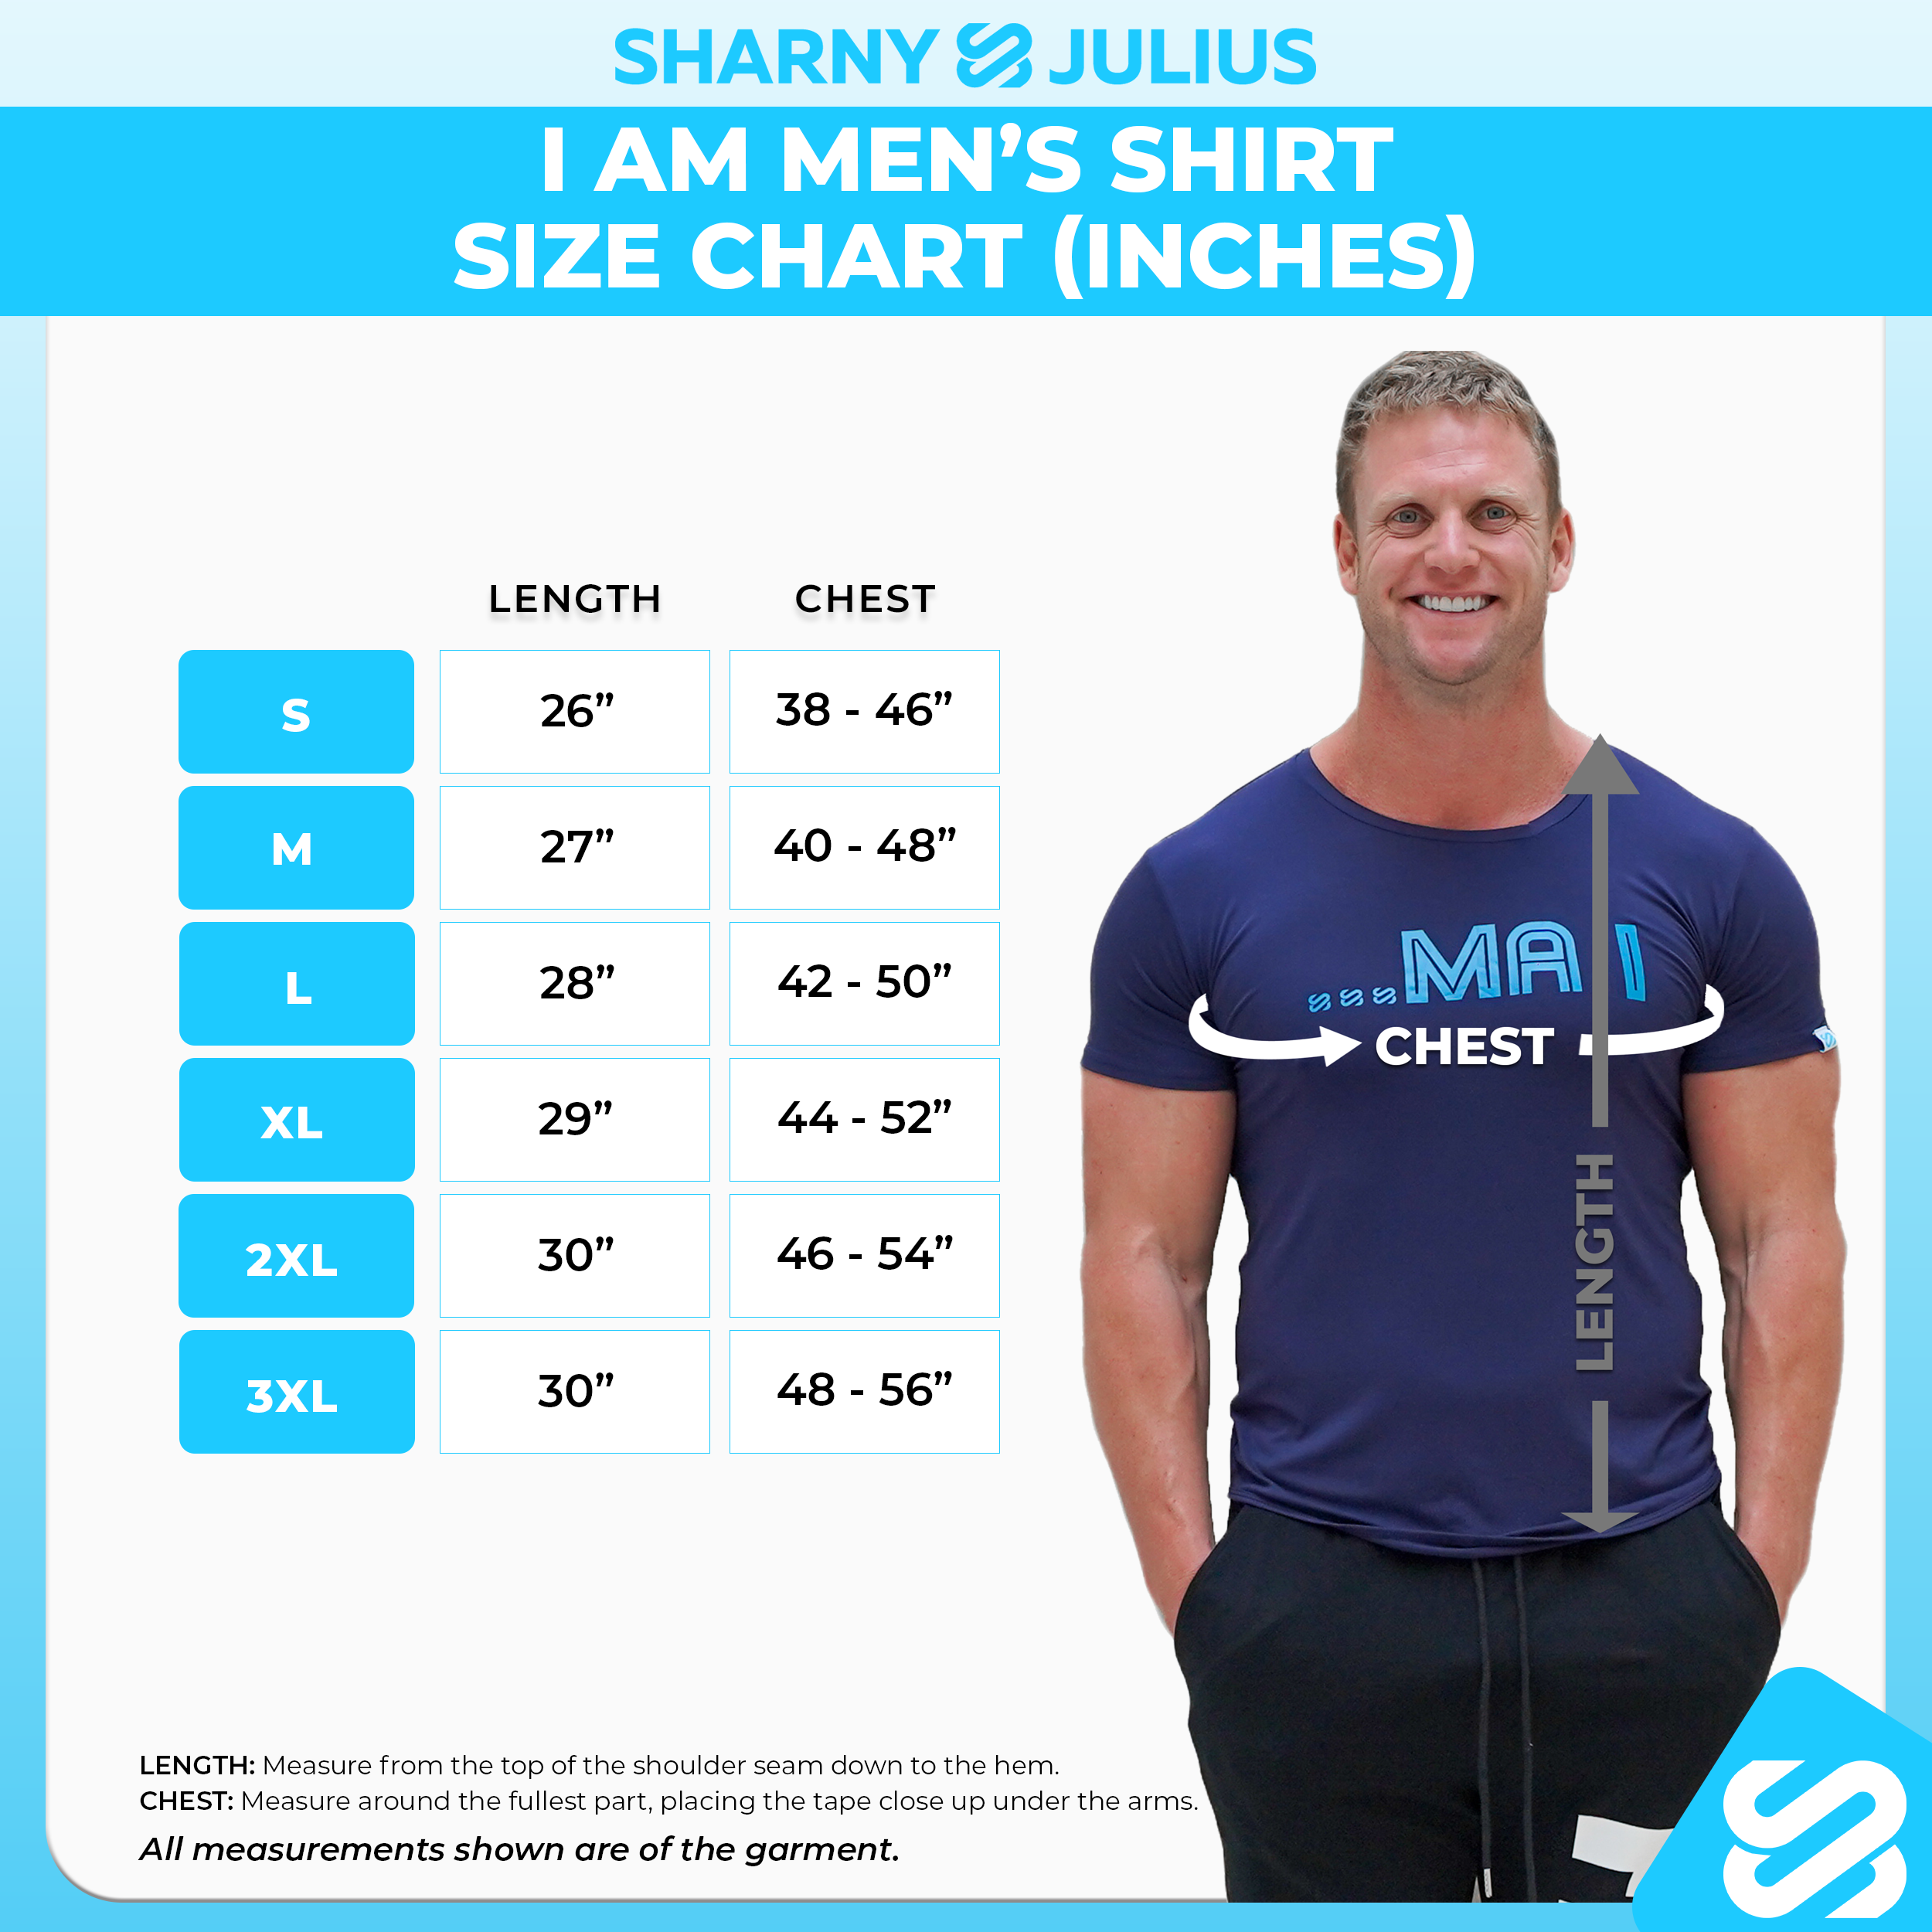 I Am Men's Size Chart (Imperial)